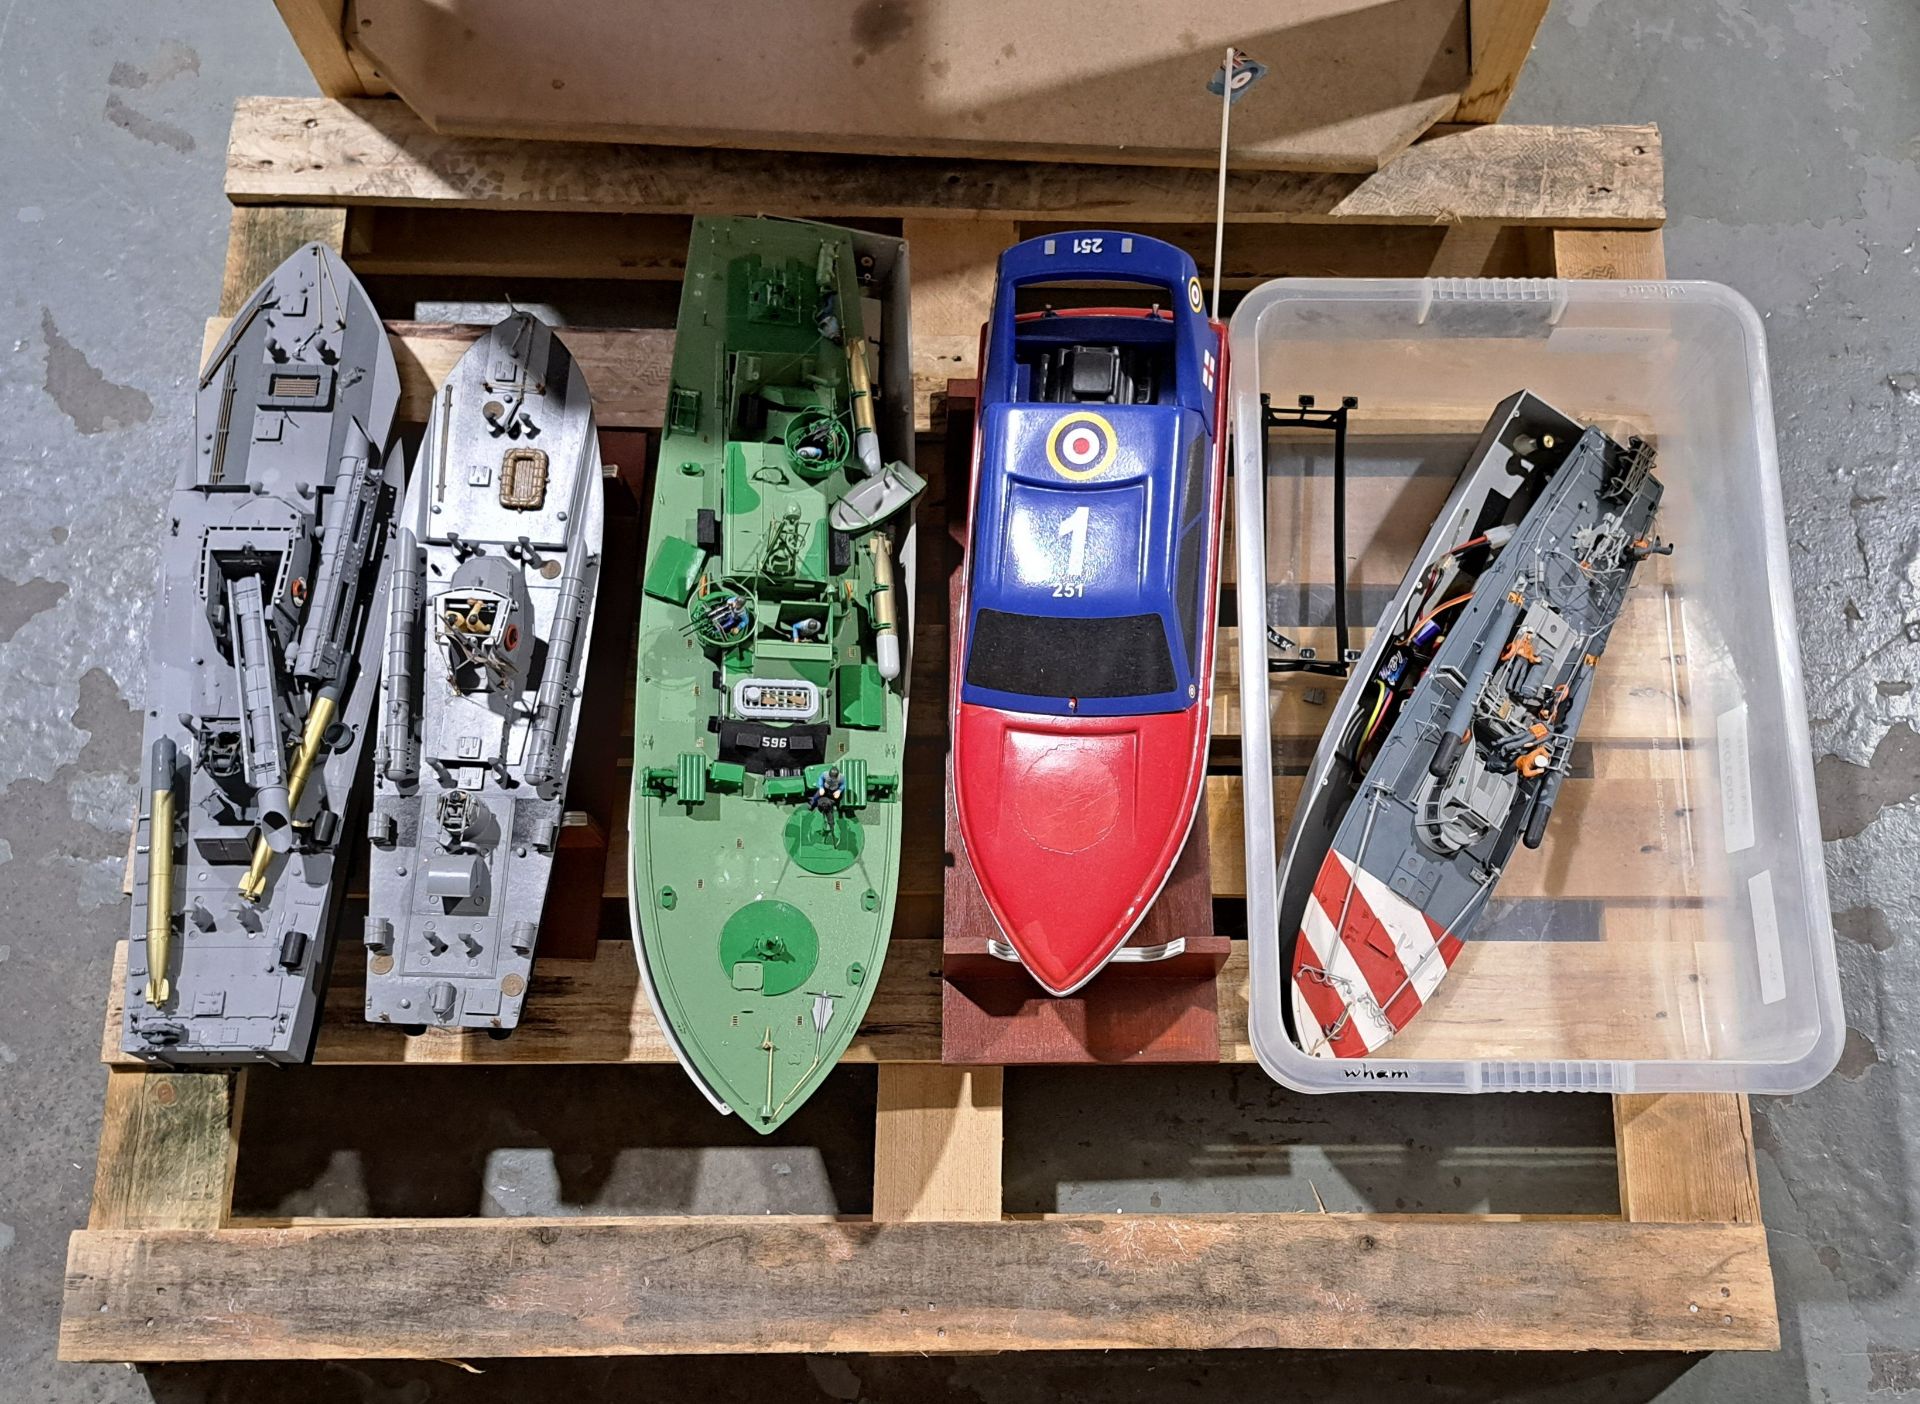 Italeri & similar a group of boats with motorized engines